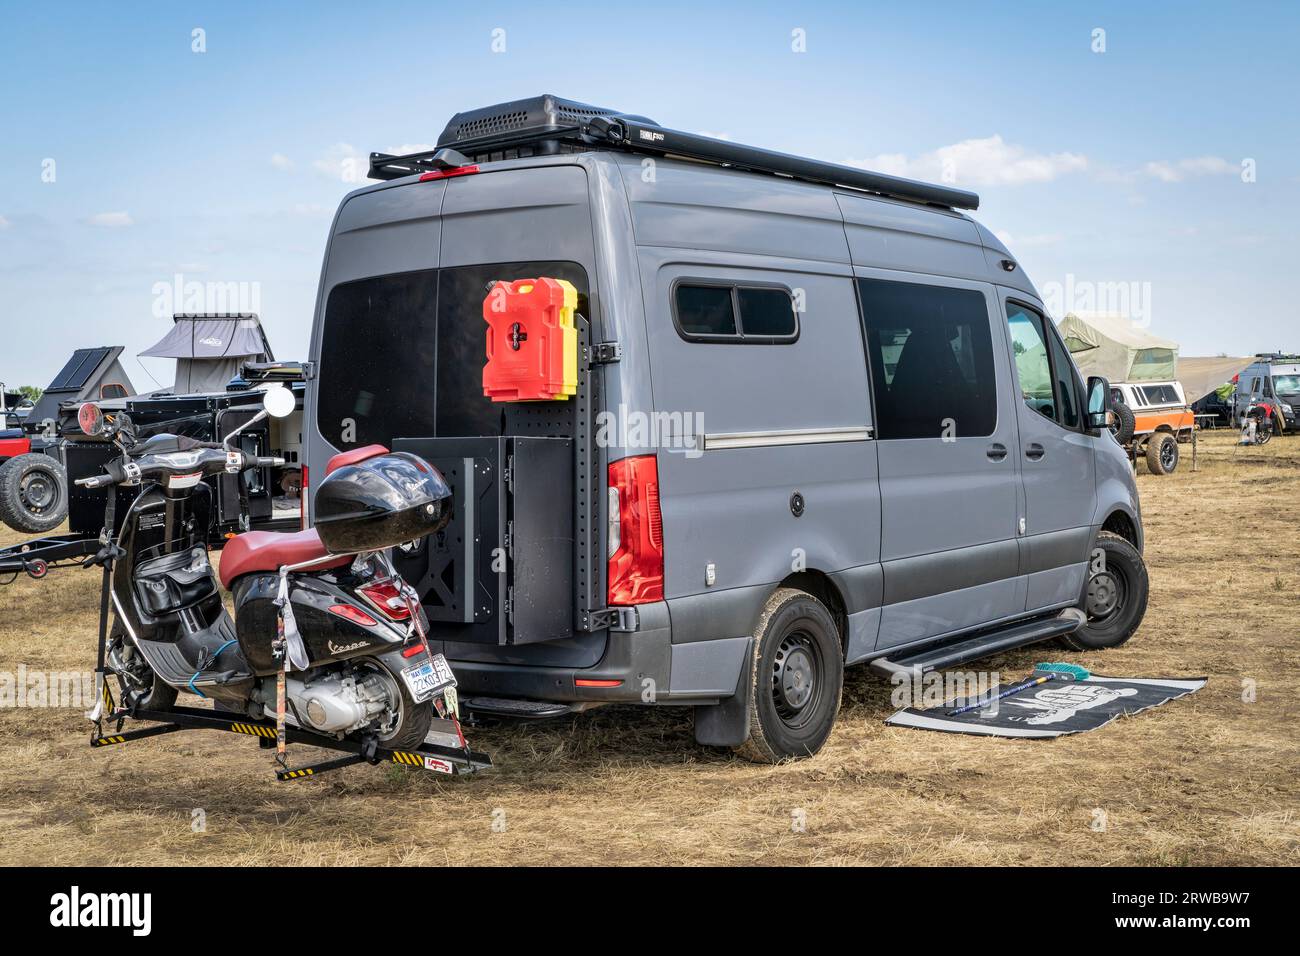 Loveland, CO, USA - August 26, 2023: 4x4 camper van on Mercedes Sprinter chassis with Vespa scooter on a hitch rack in a busy campground. Stock Photo